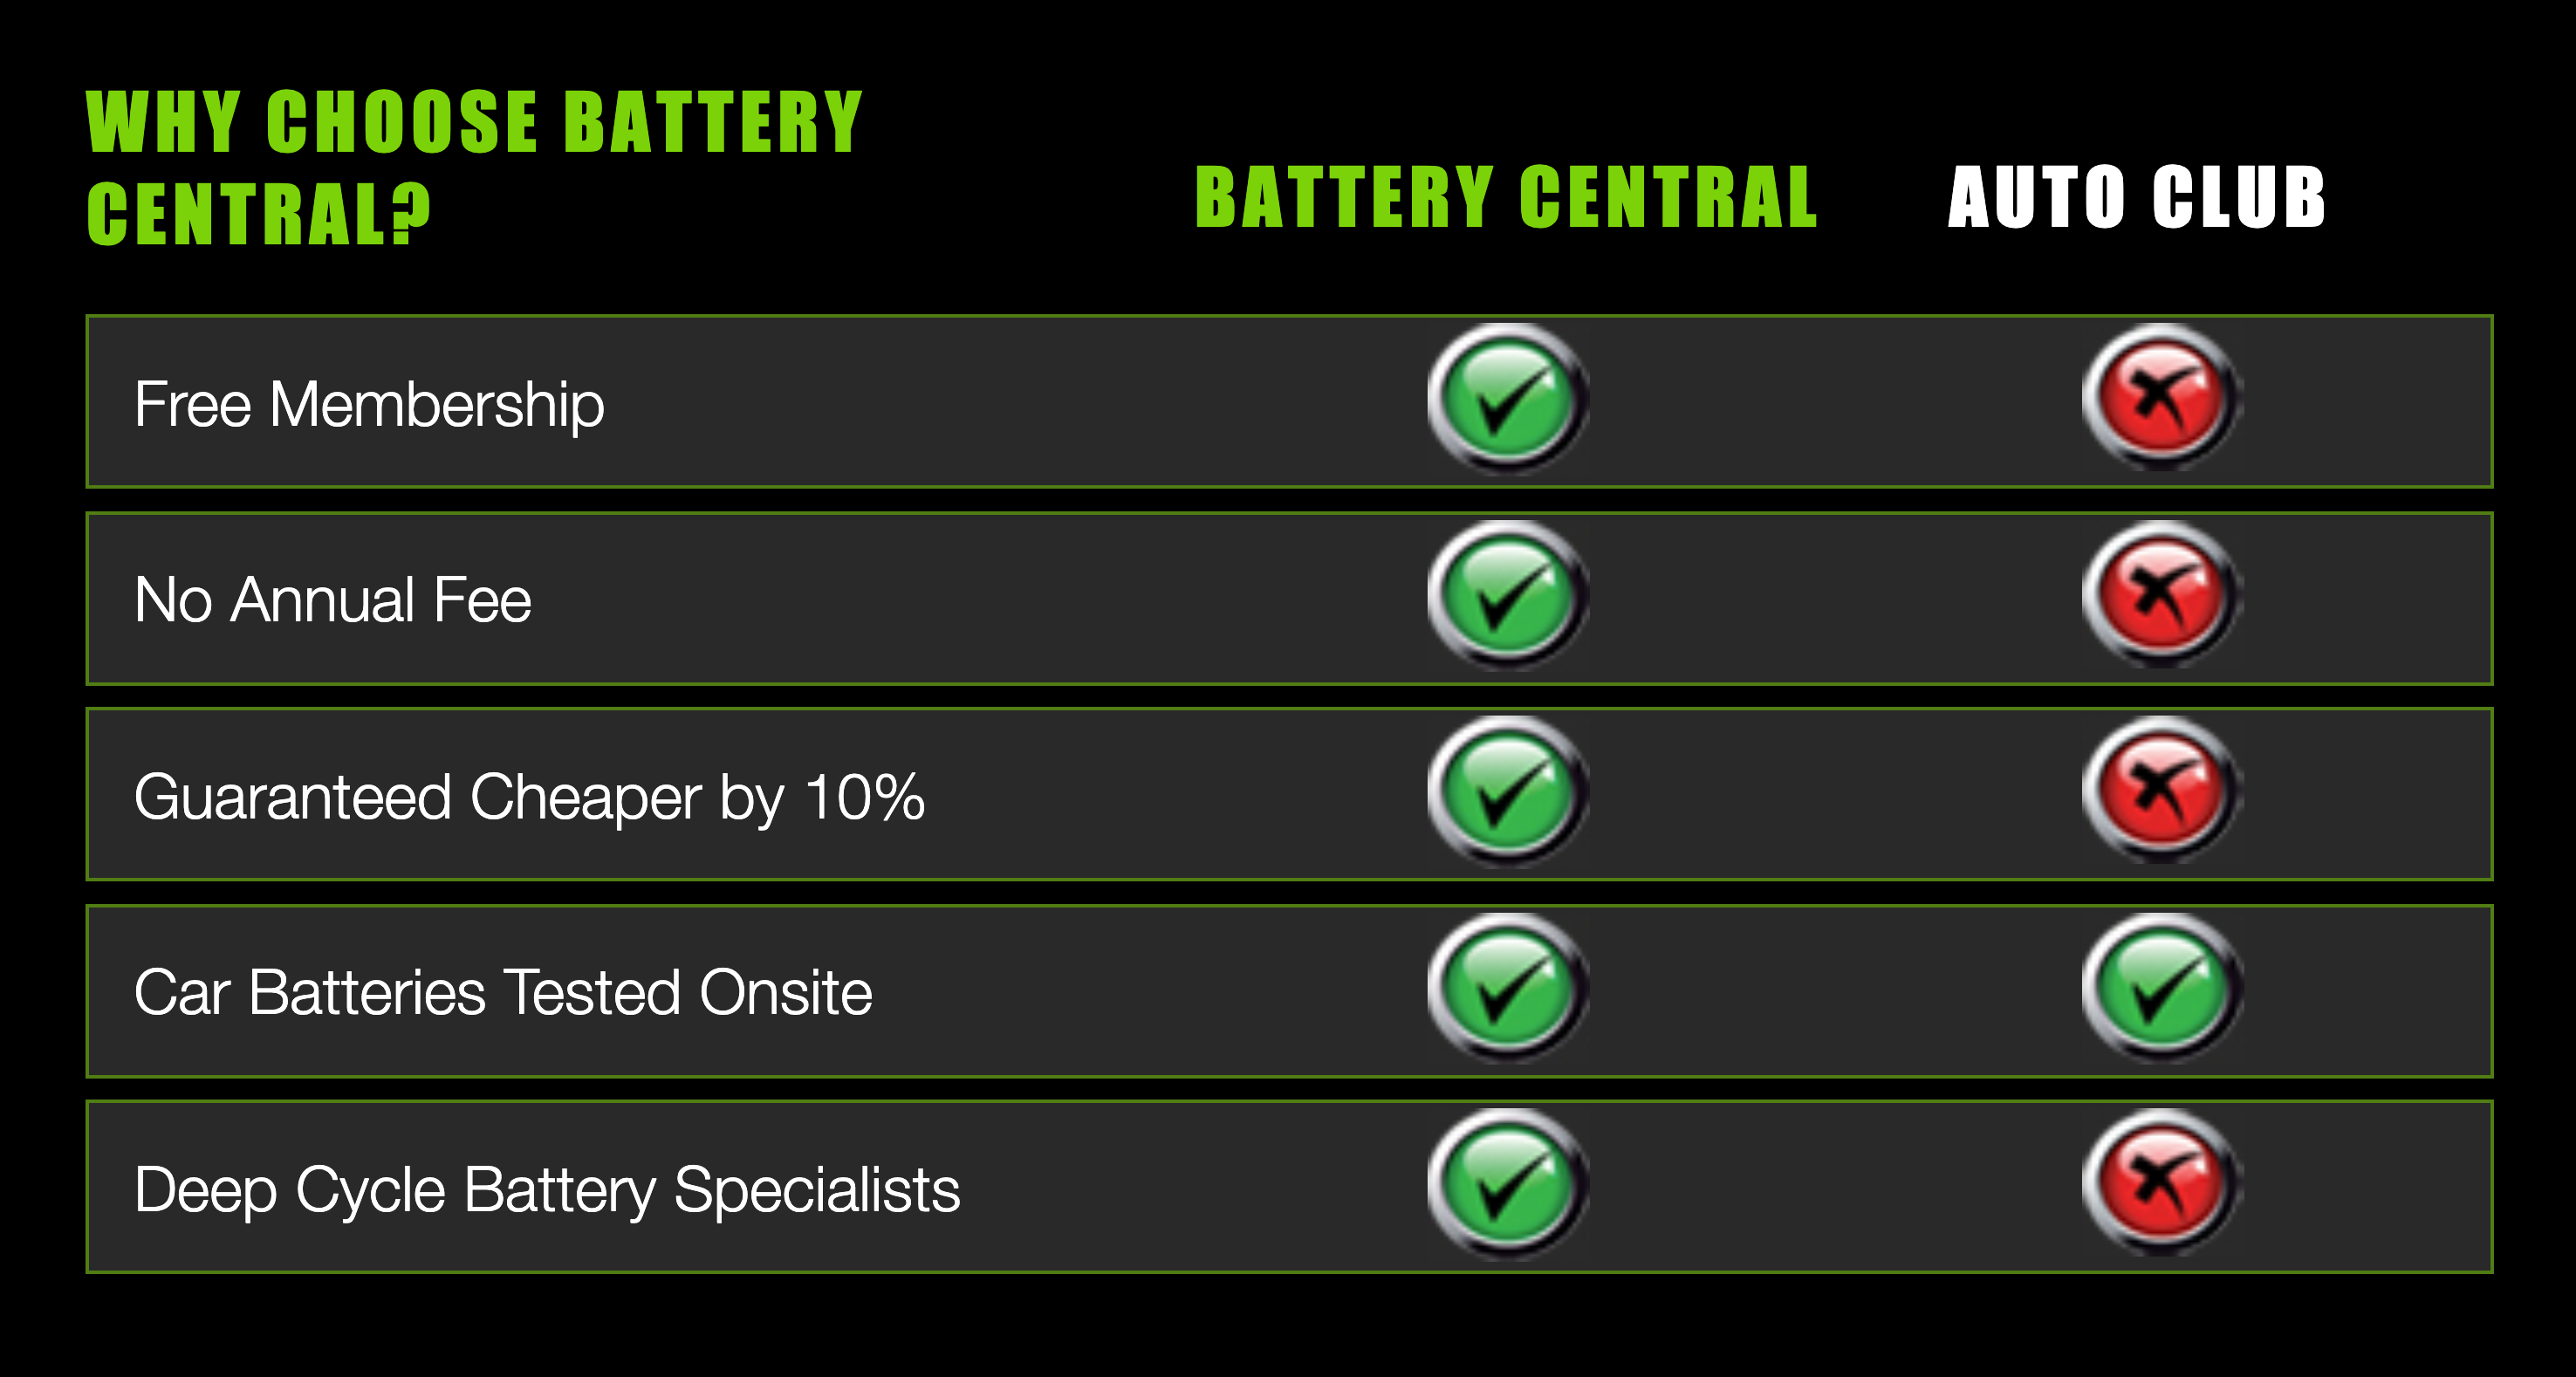 Why choose Battery Central?